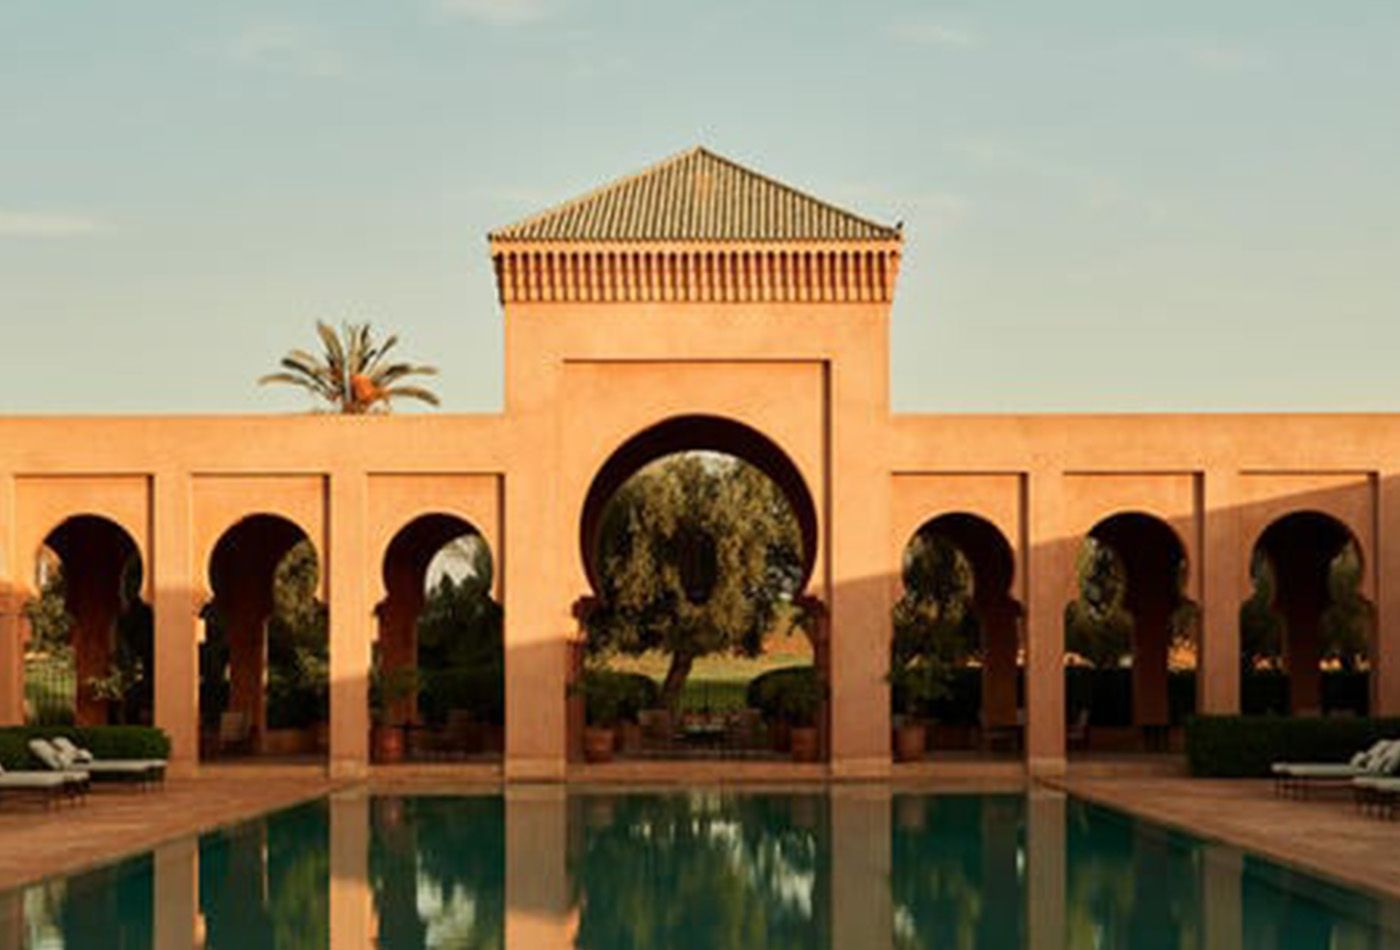 Large terracotta building overlooks a large swimming pool